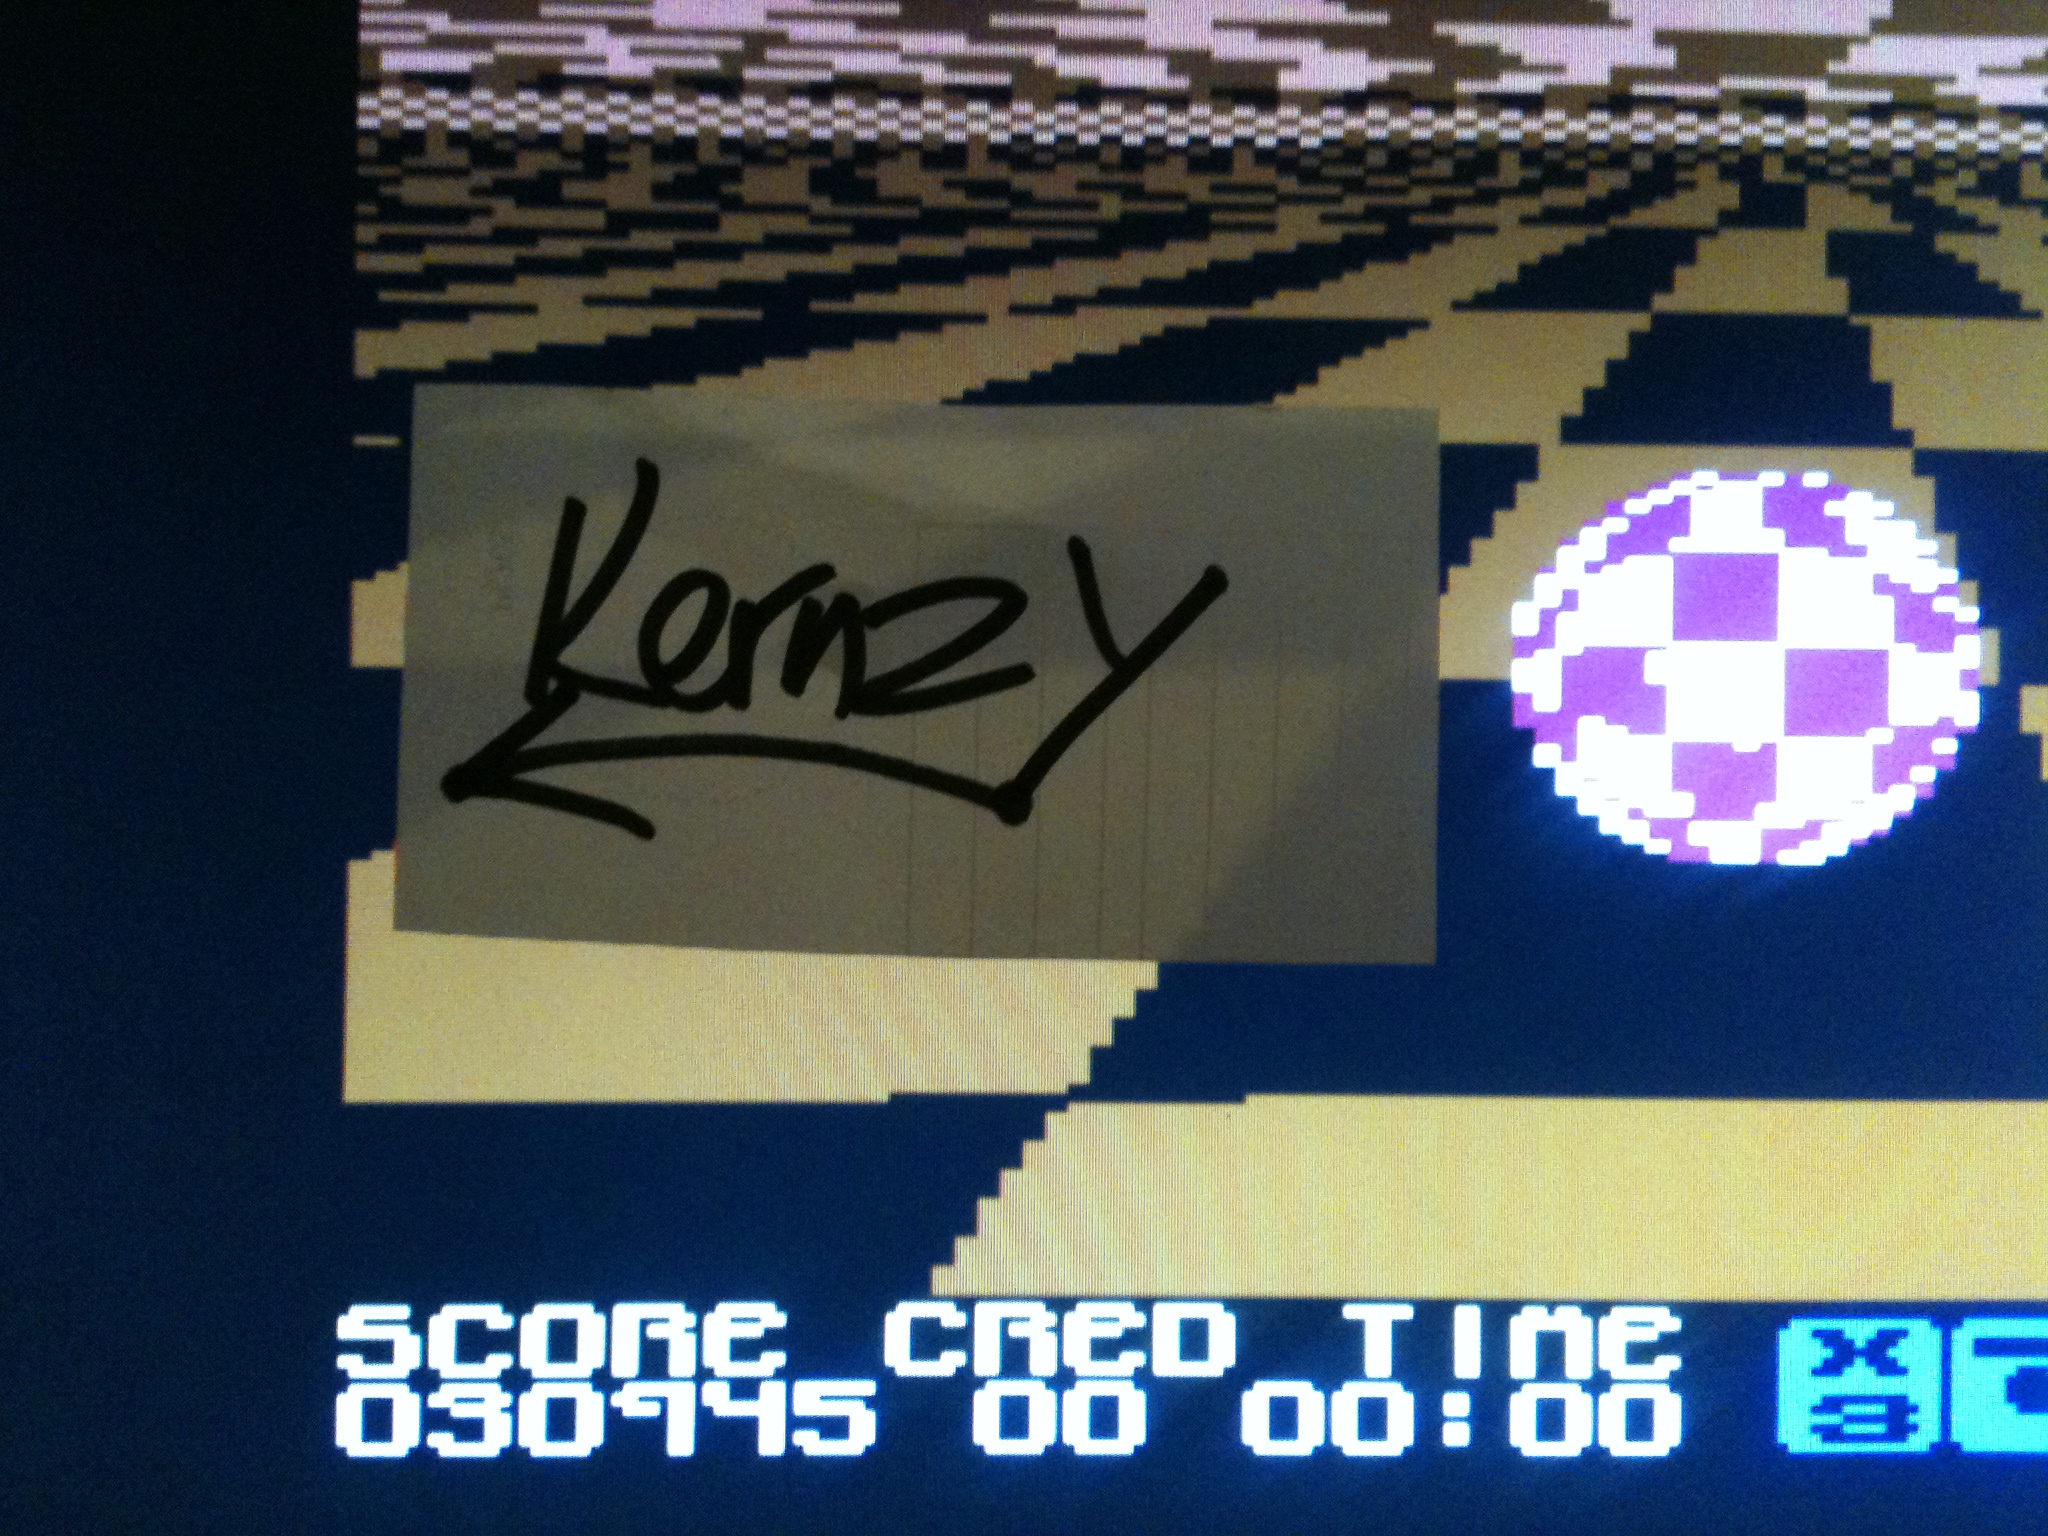 kernzy: Cosmic Causeway (Commodore 64 Emulated) 30,945 points on 2015-05-08 18:53:17